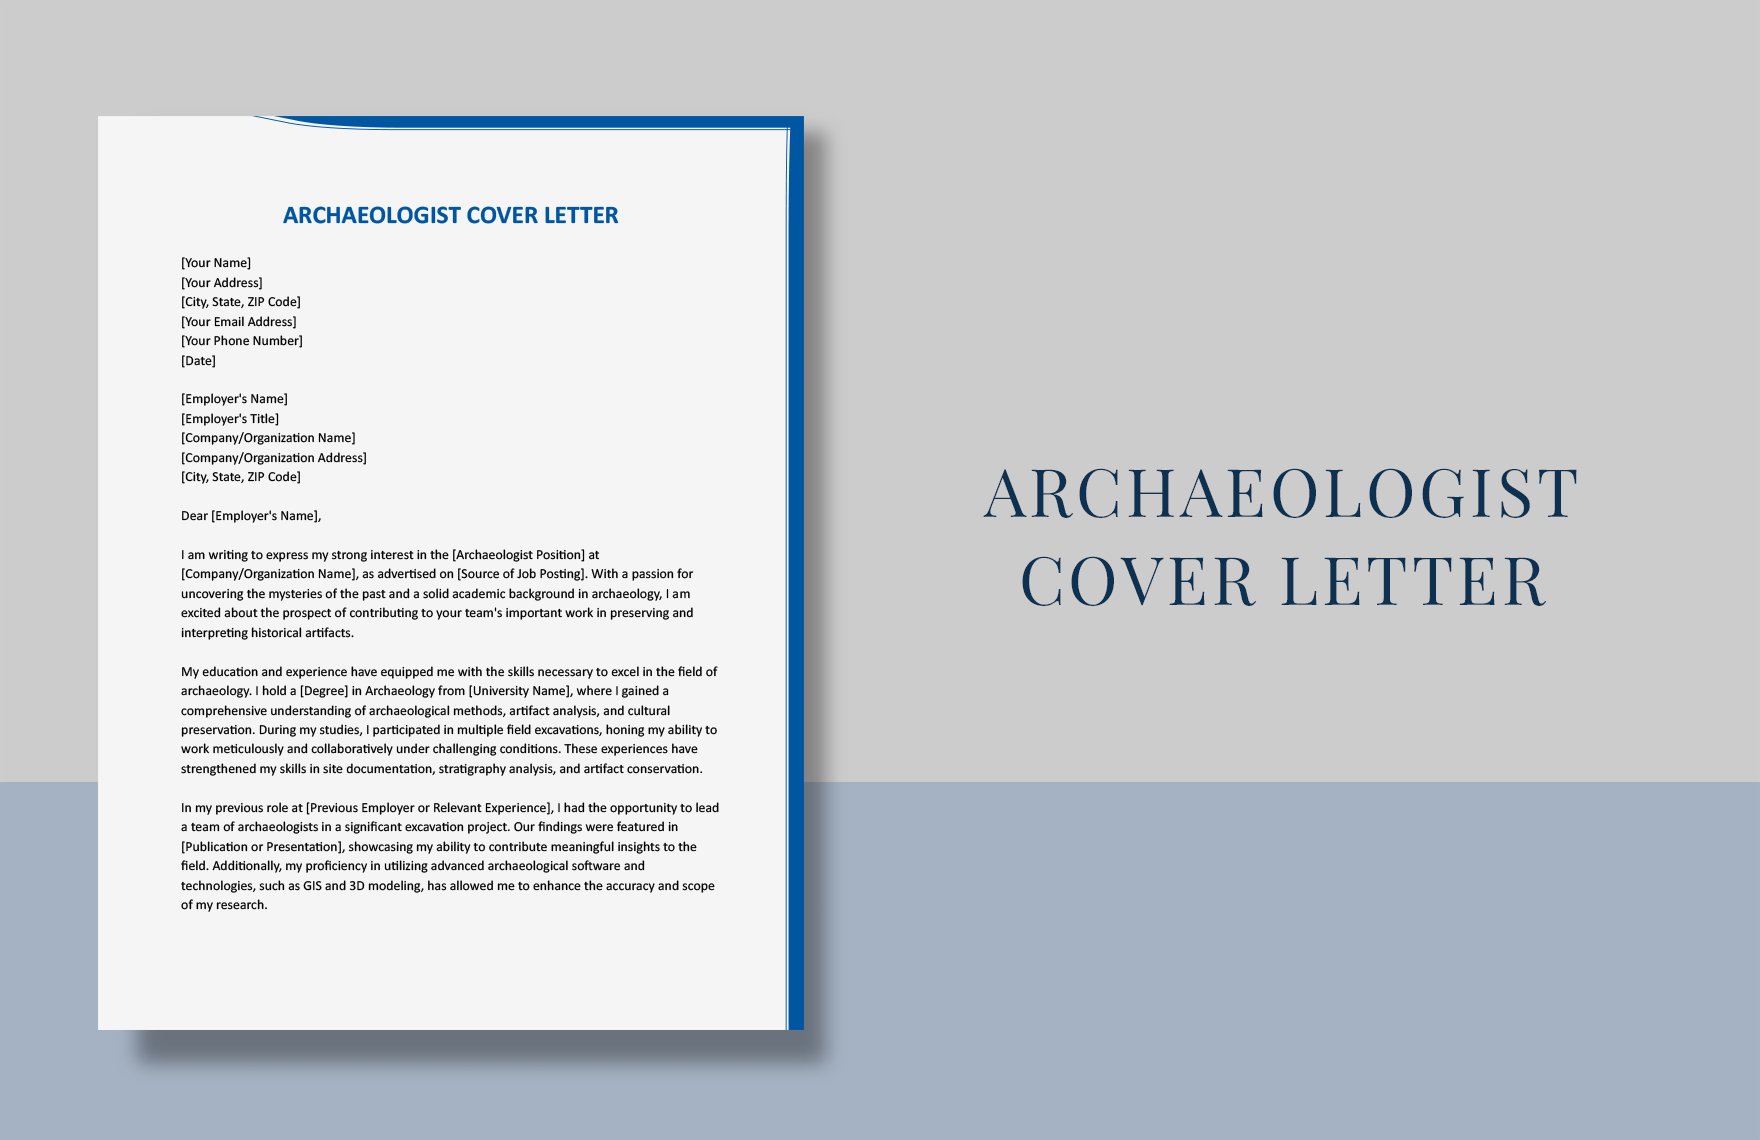 Archaeologist Cover Letter in Word, Google Docs